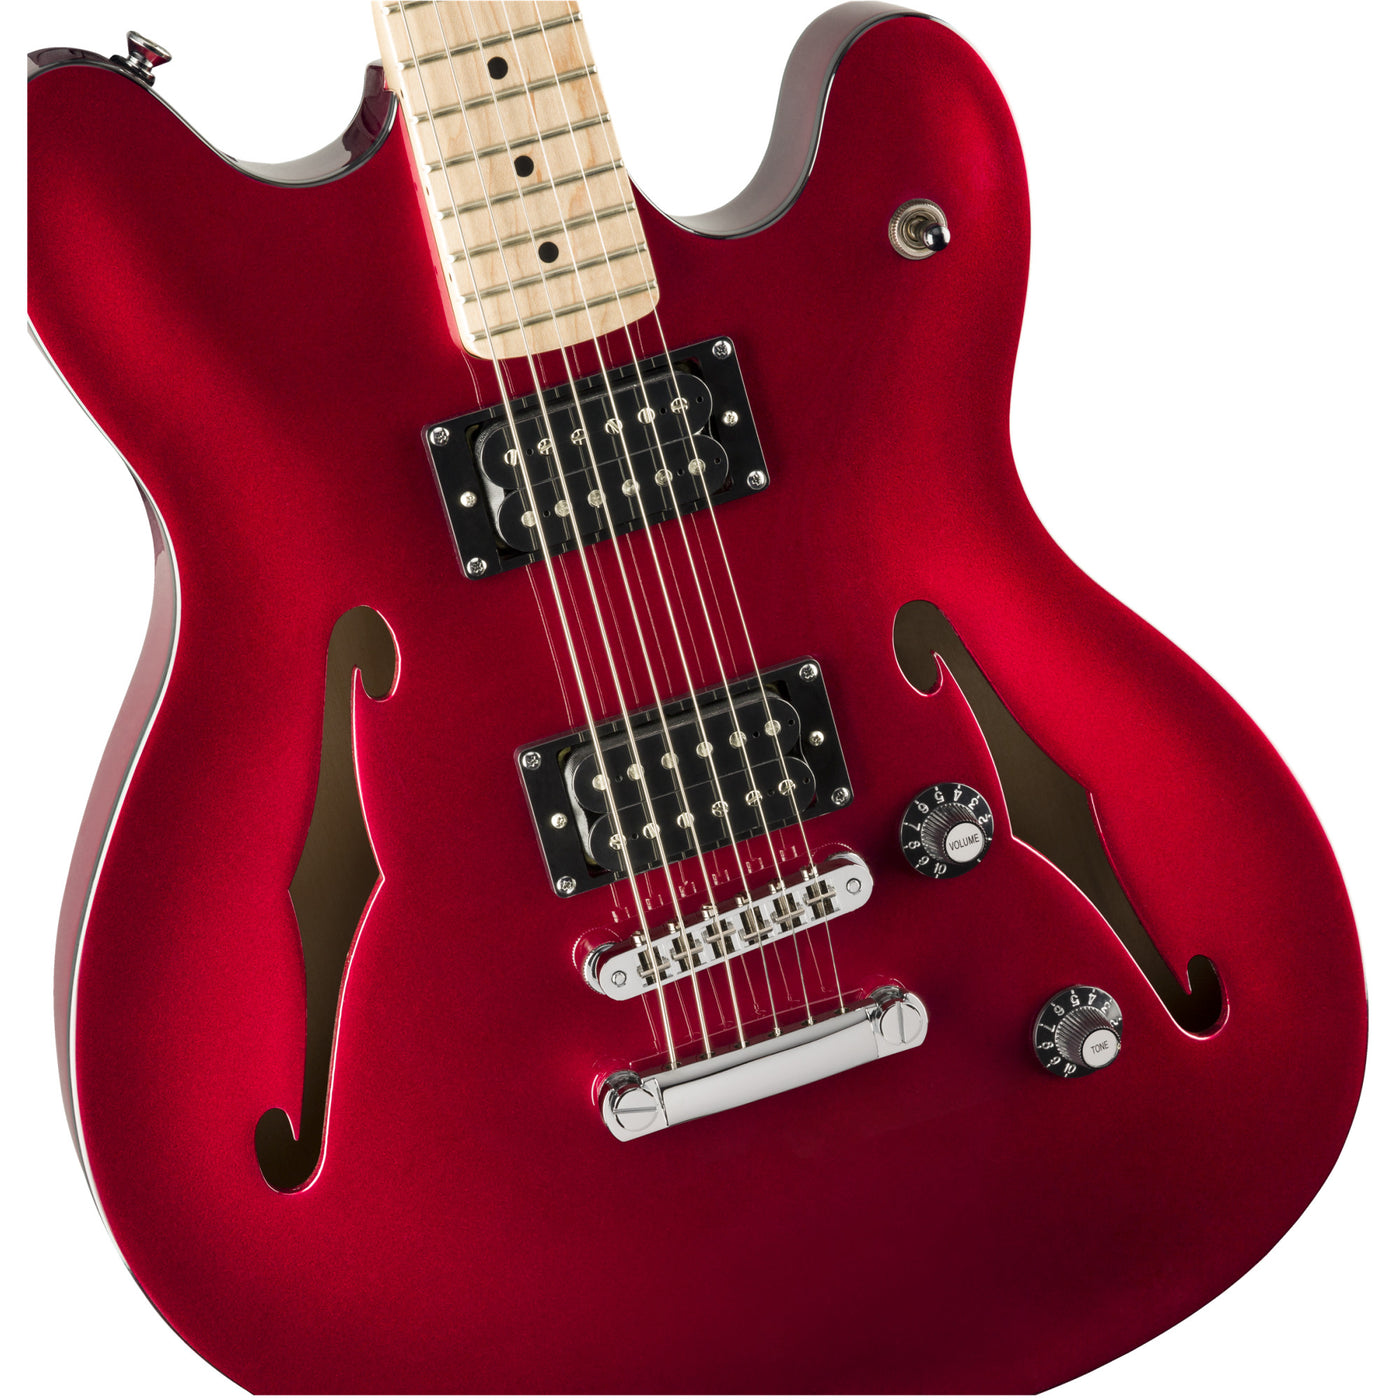 Fender Affinity Series Starcaster Electric Guitar, Candy Apple Red (0370590509)